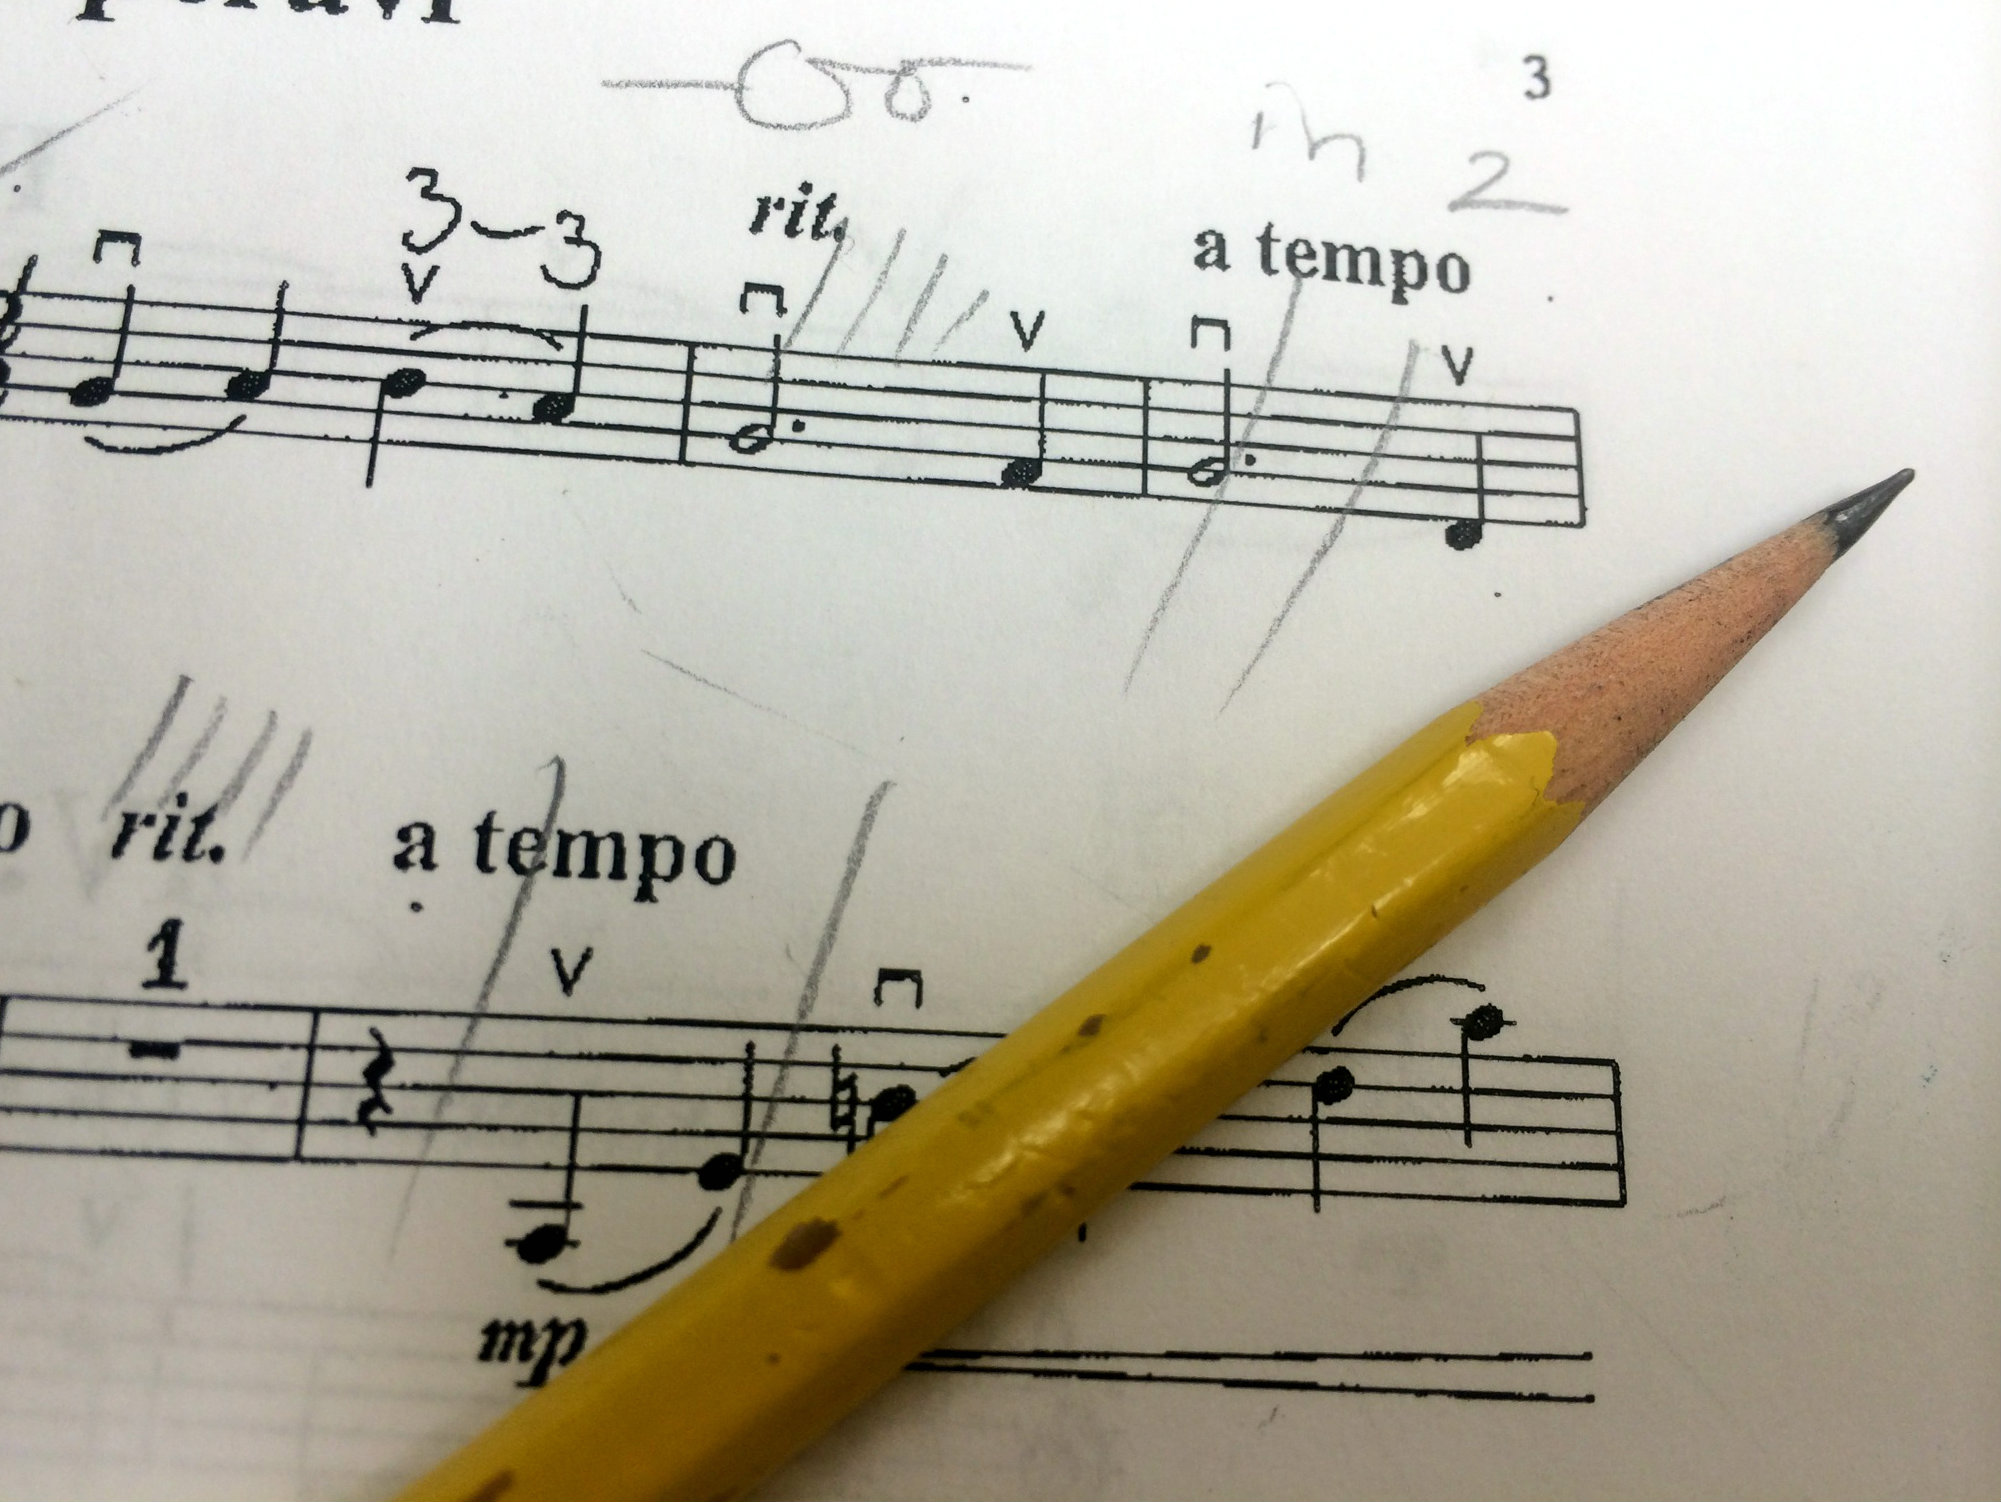 Photo: Music score with pencil markings